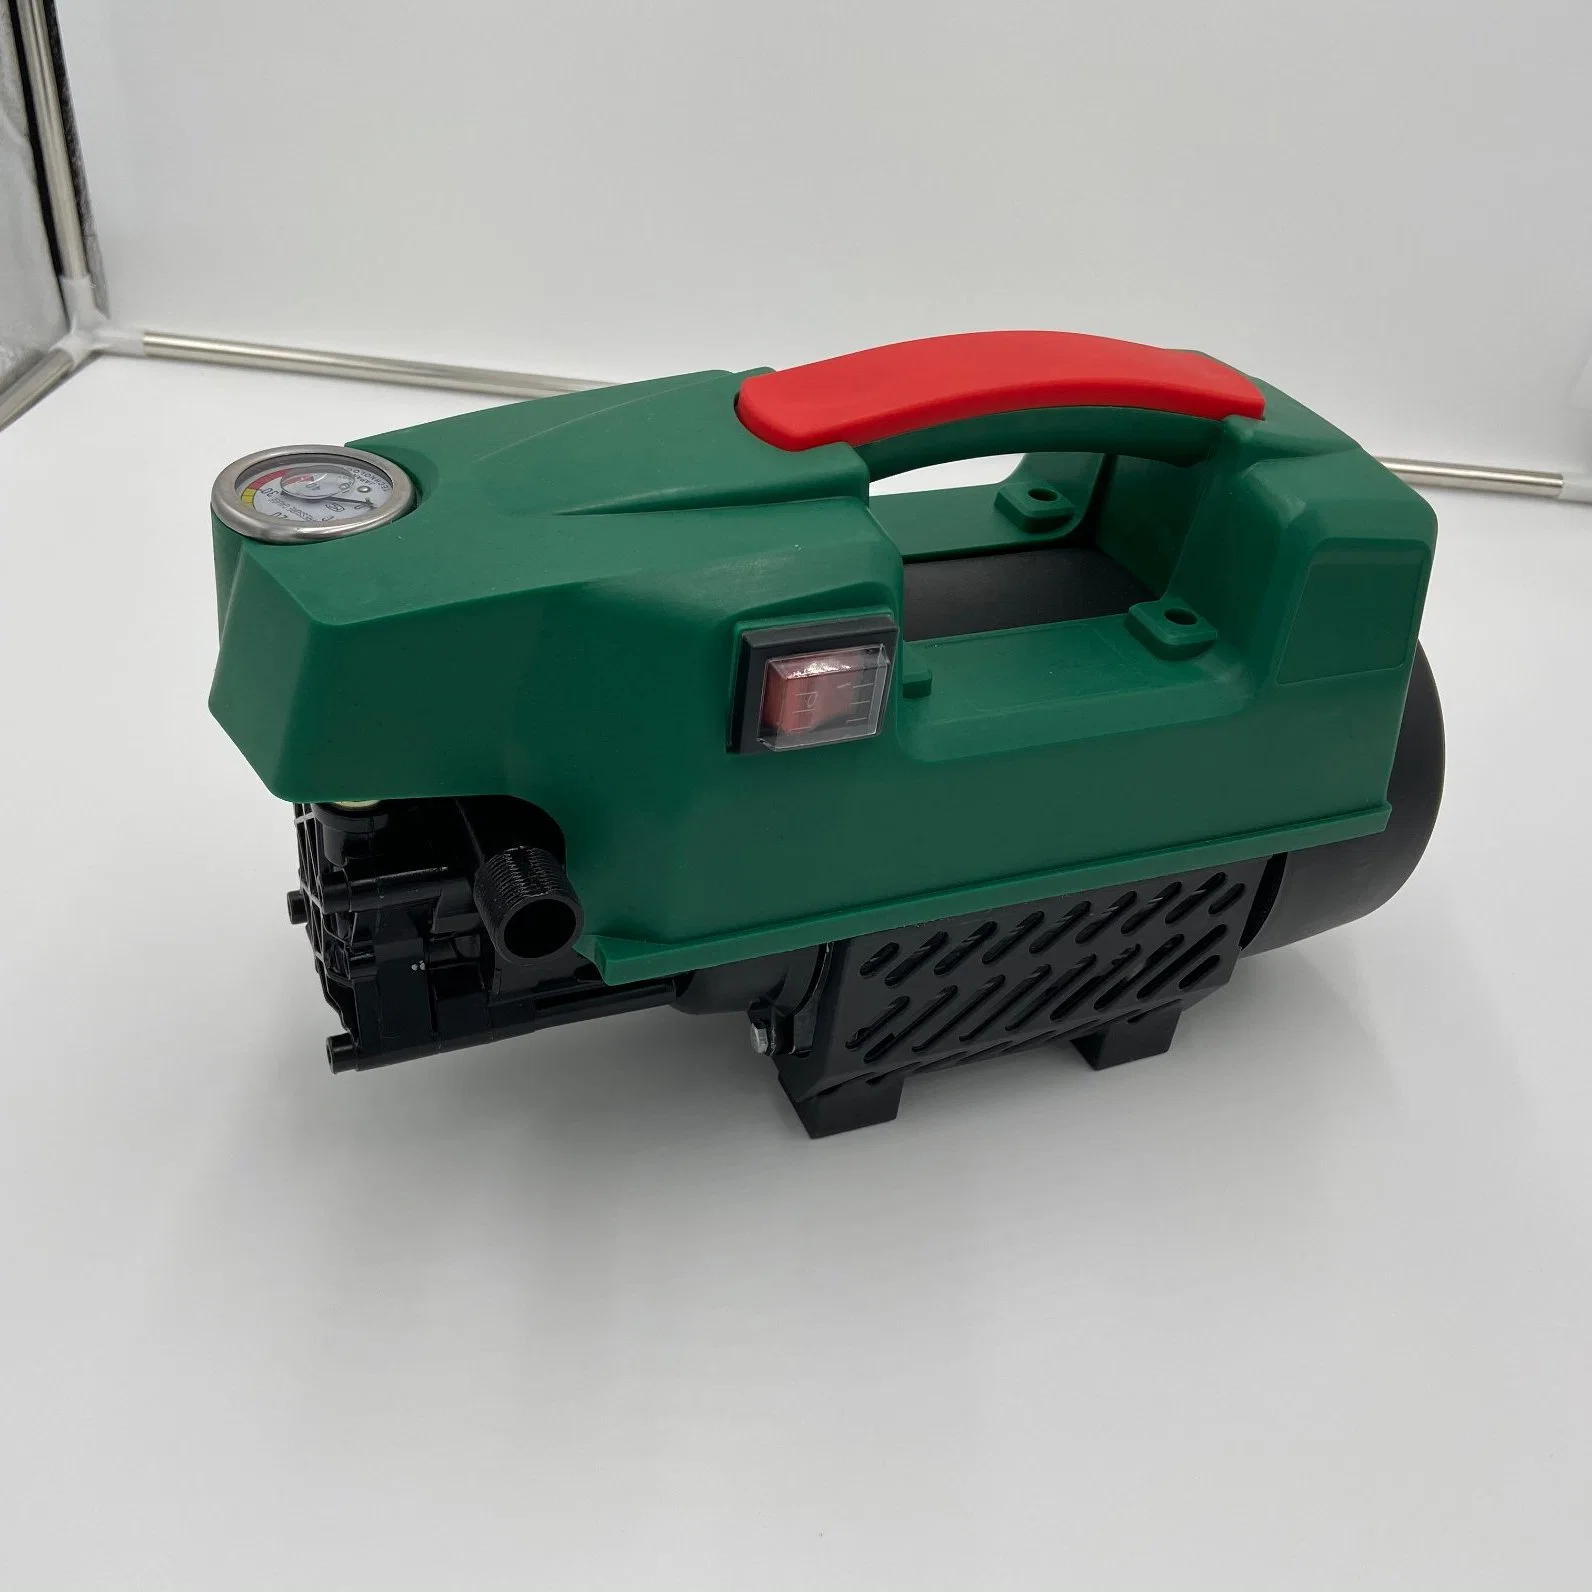 1.8kw Portable High Pressure Cleaner Electric Mini 80bar Commercial Power Cleaning Car Cleaner